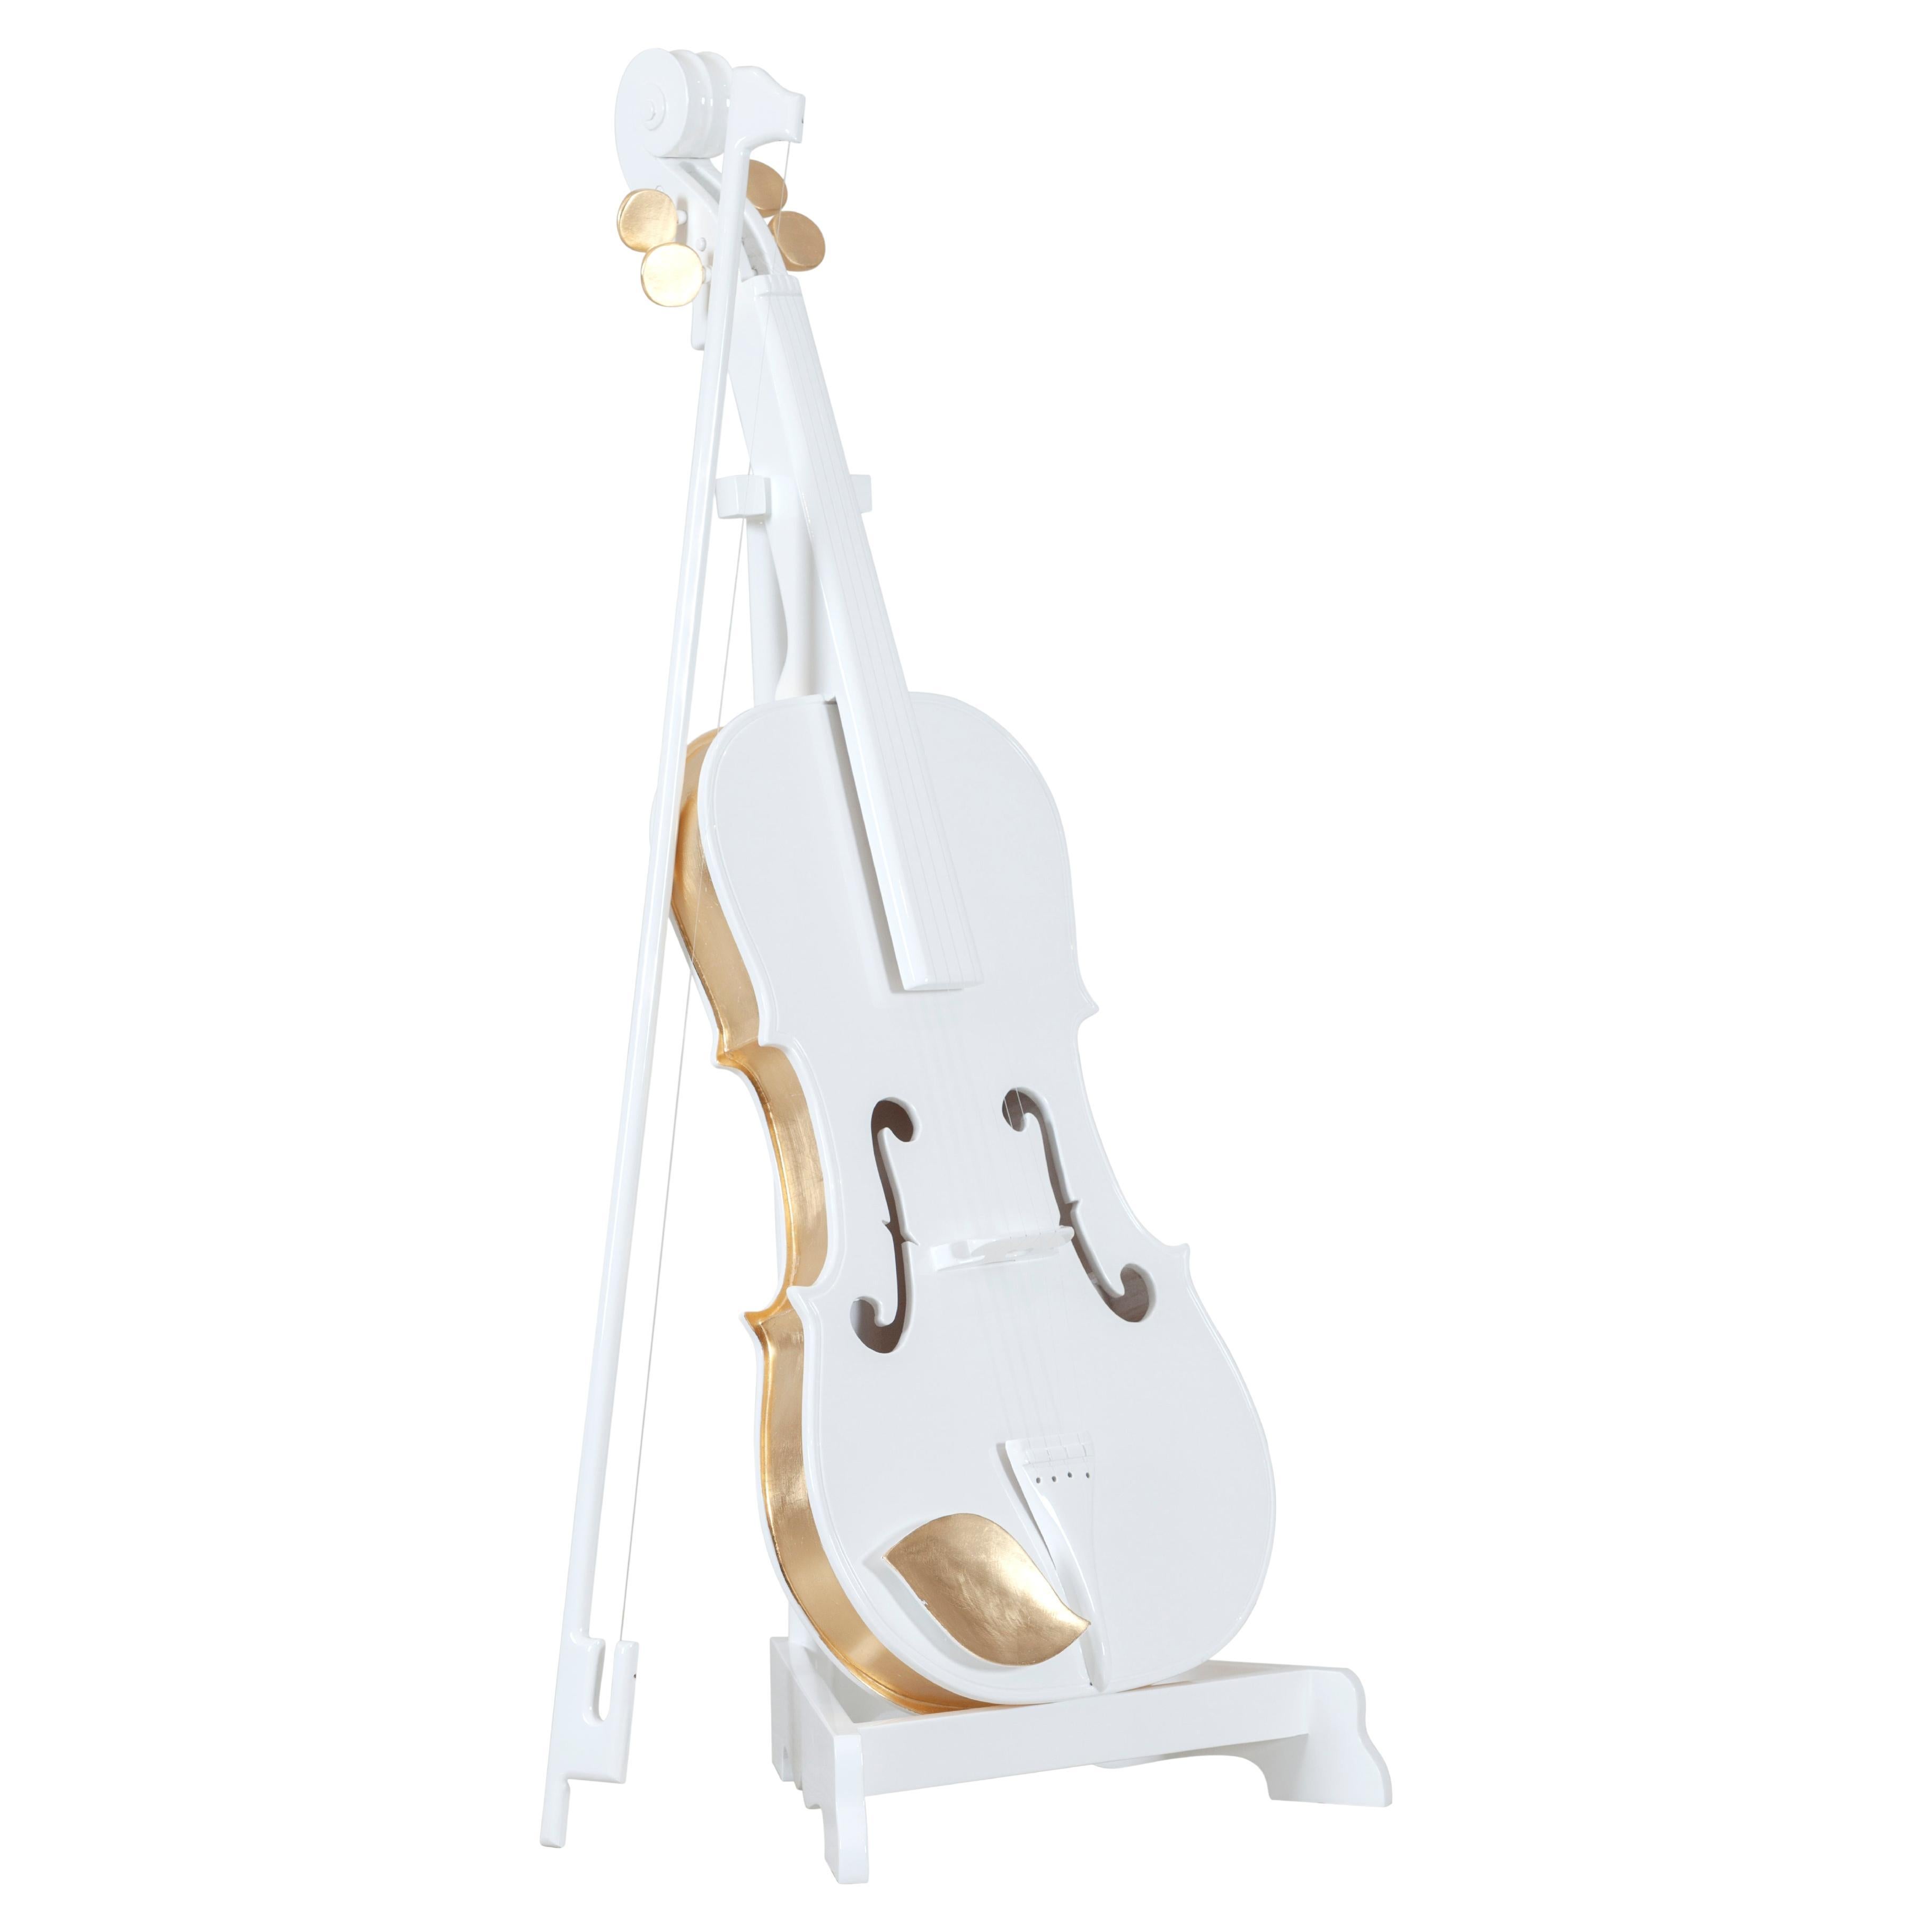 Decorative Brahms Cello Sculpture Piece Handmade in Portugal by Lusitanus Home For Sale